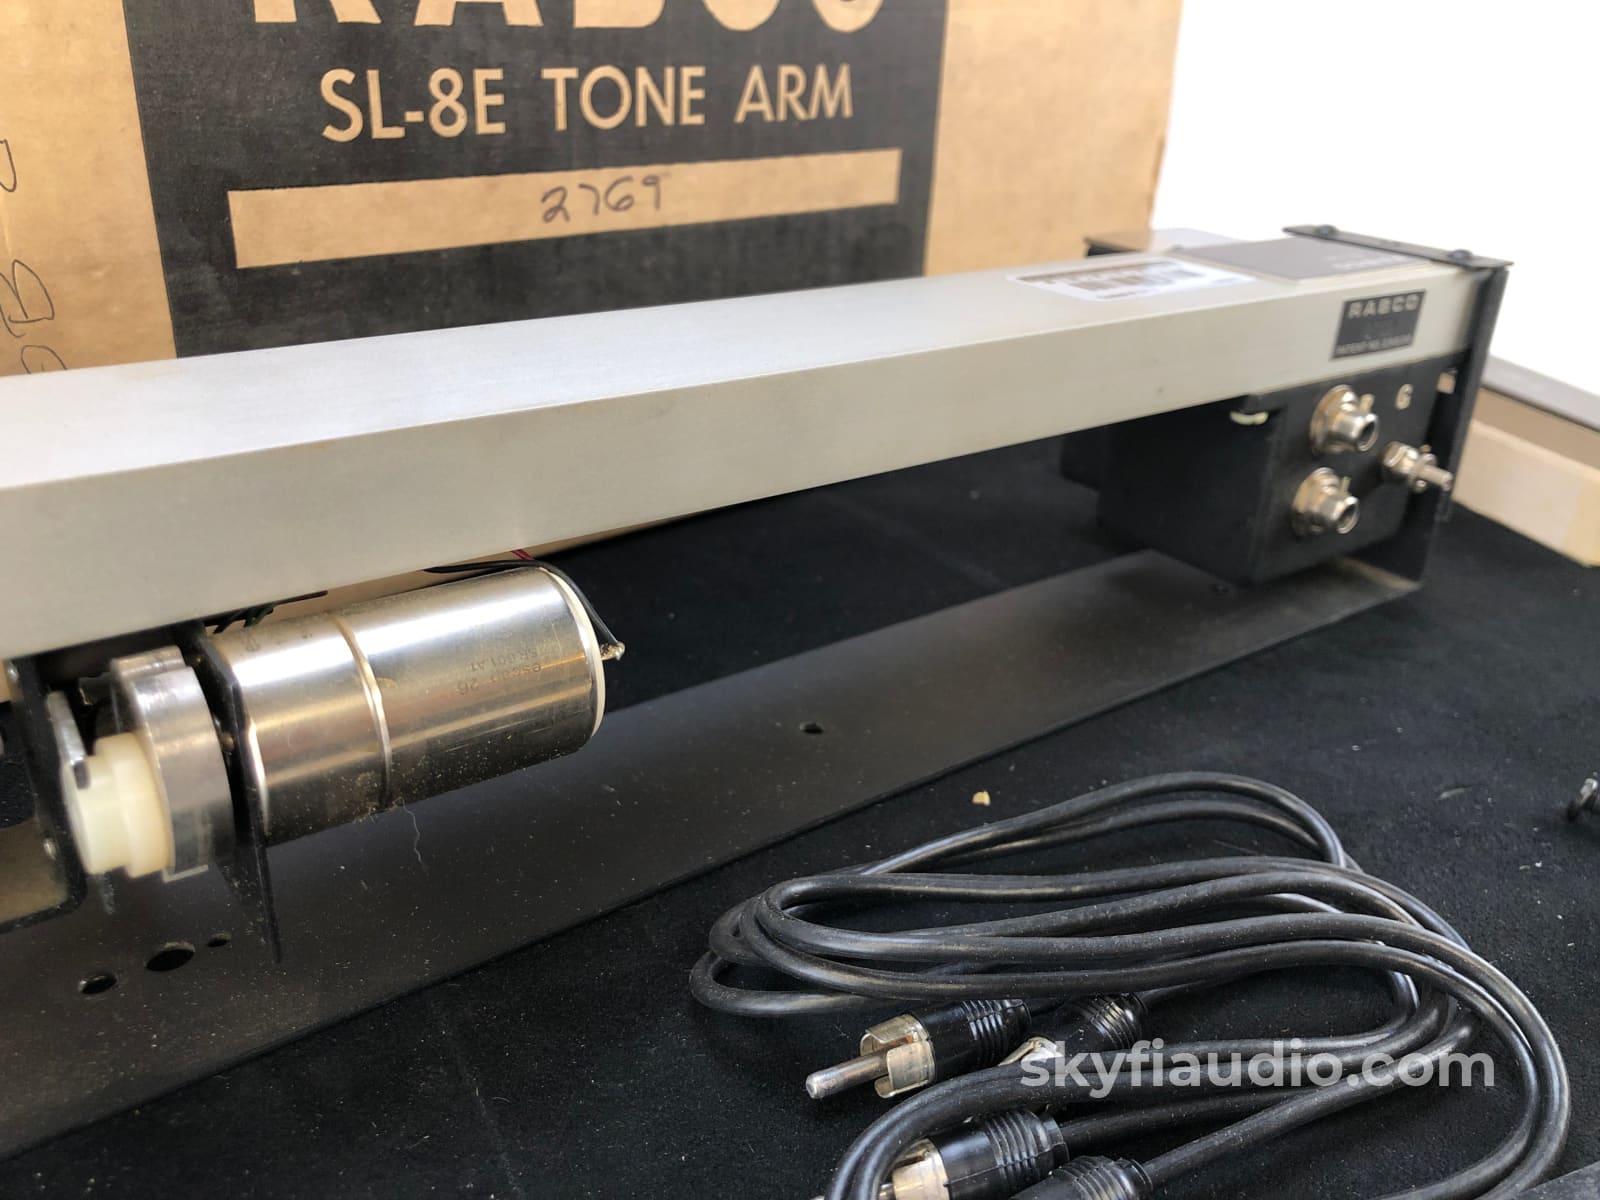 Rabco Sl-8E Tangential Tonearm In Box - Complete Tested With Extras Turntable